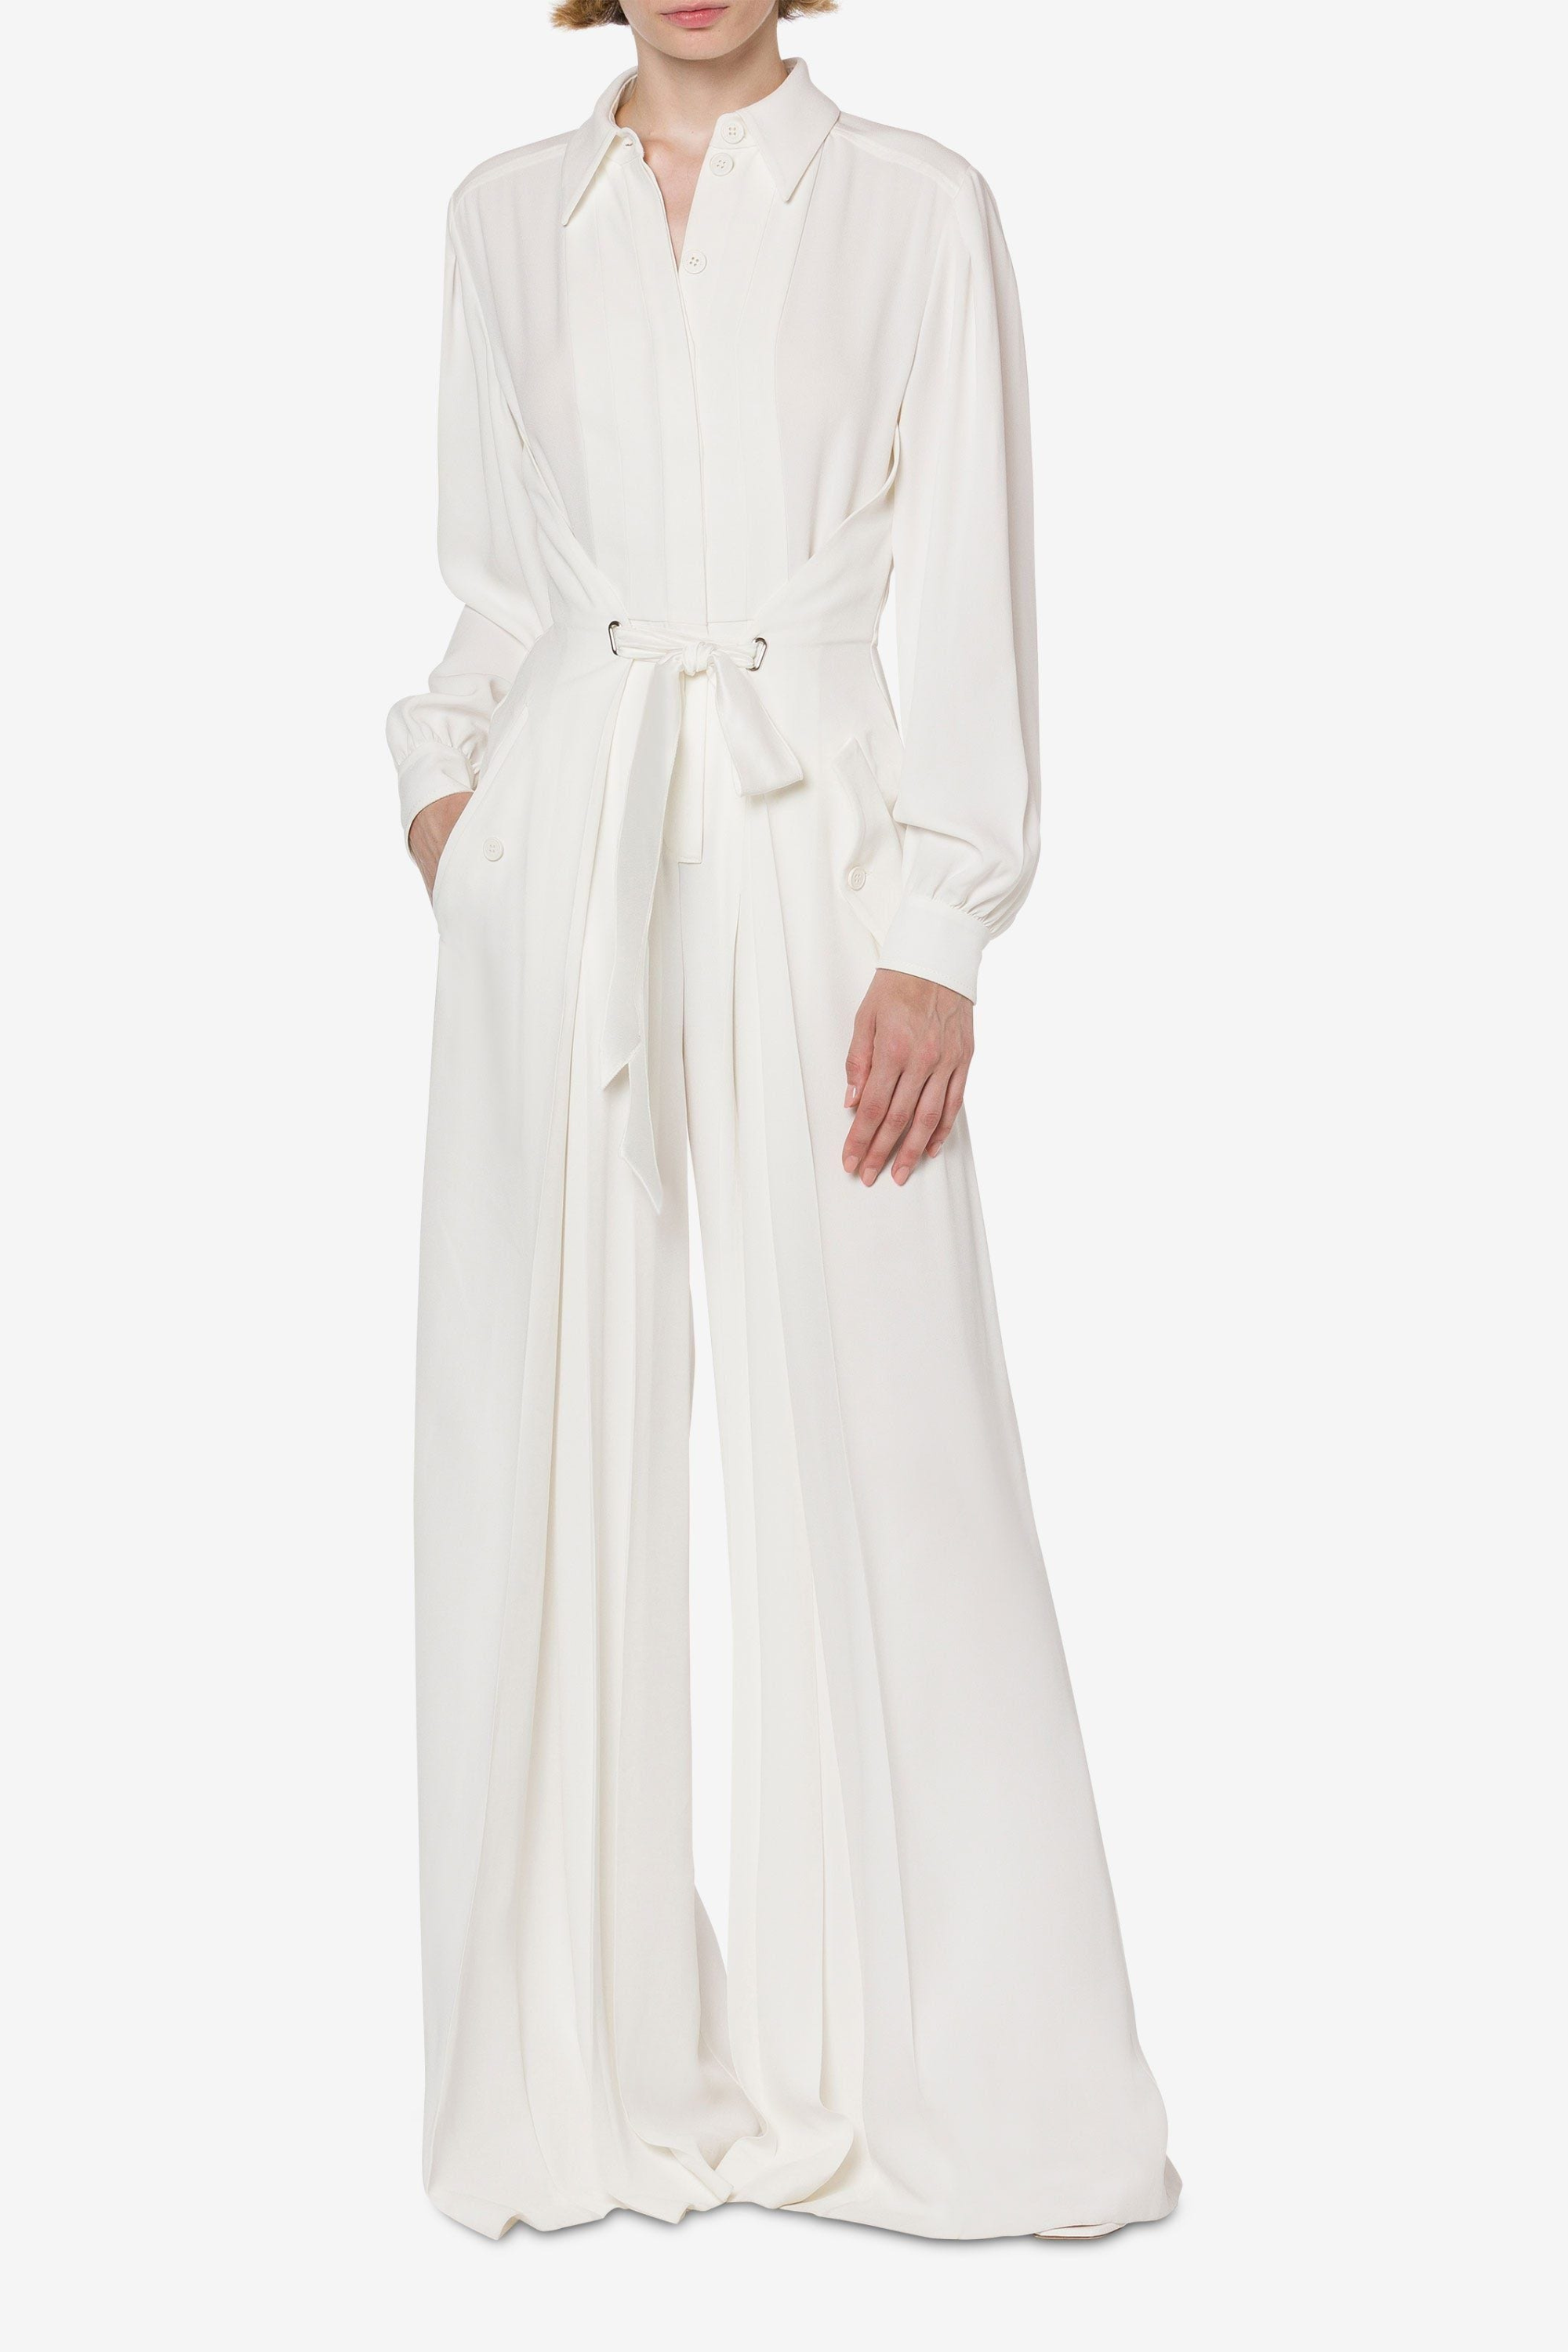 Satin Jumpsuit by Alberta Ferretti, Colour: White, features a fitted cut with a loose, fluid fit, crafted folds and back folds further enhance the softness of the fabric, SS23 Collection, New arrivals at Espace Cannelle